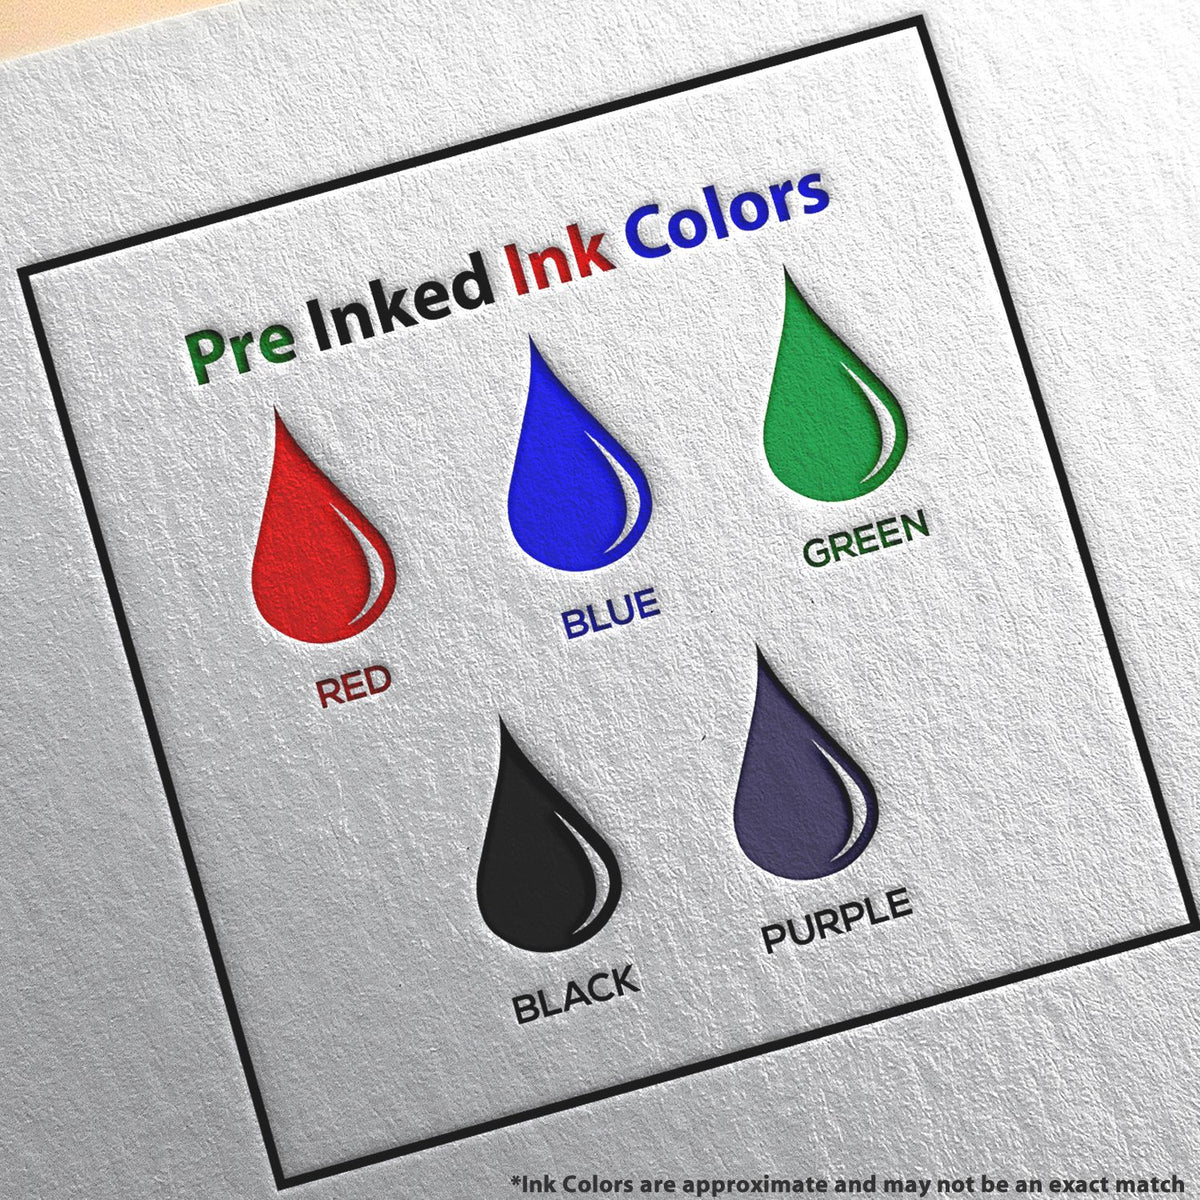 A picture showing the different ink colors or hues available for the MaxLight Premium Pre-Inked Michigan State Seal Notarial Stamp product.